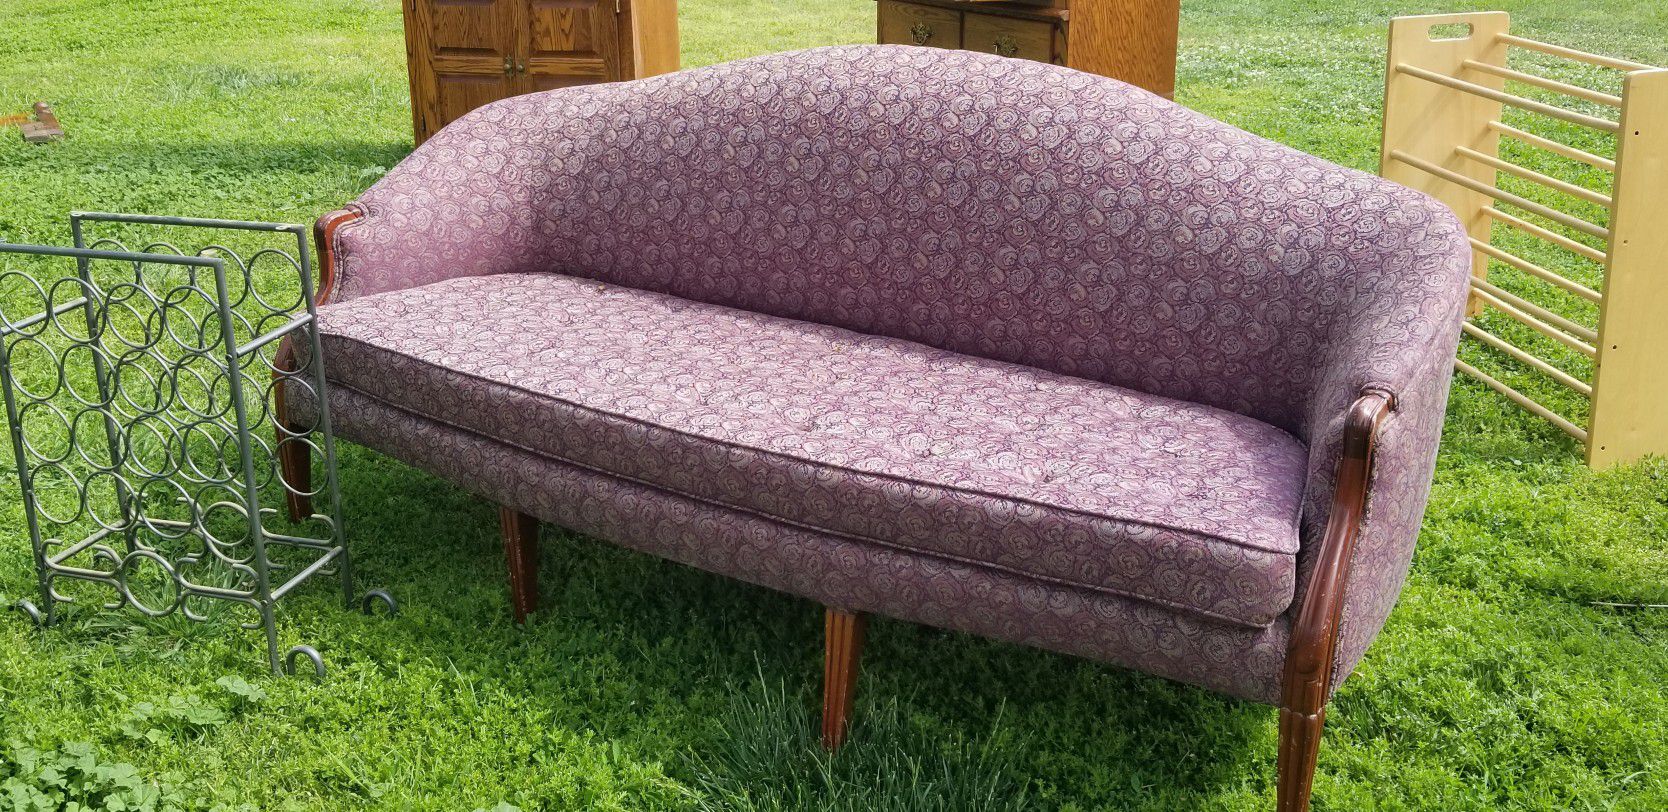 Antique loveseat. Middle leg broke. Will need cleaned or reupholstered. No rips or tears.